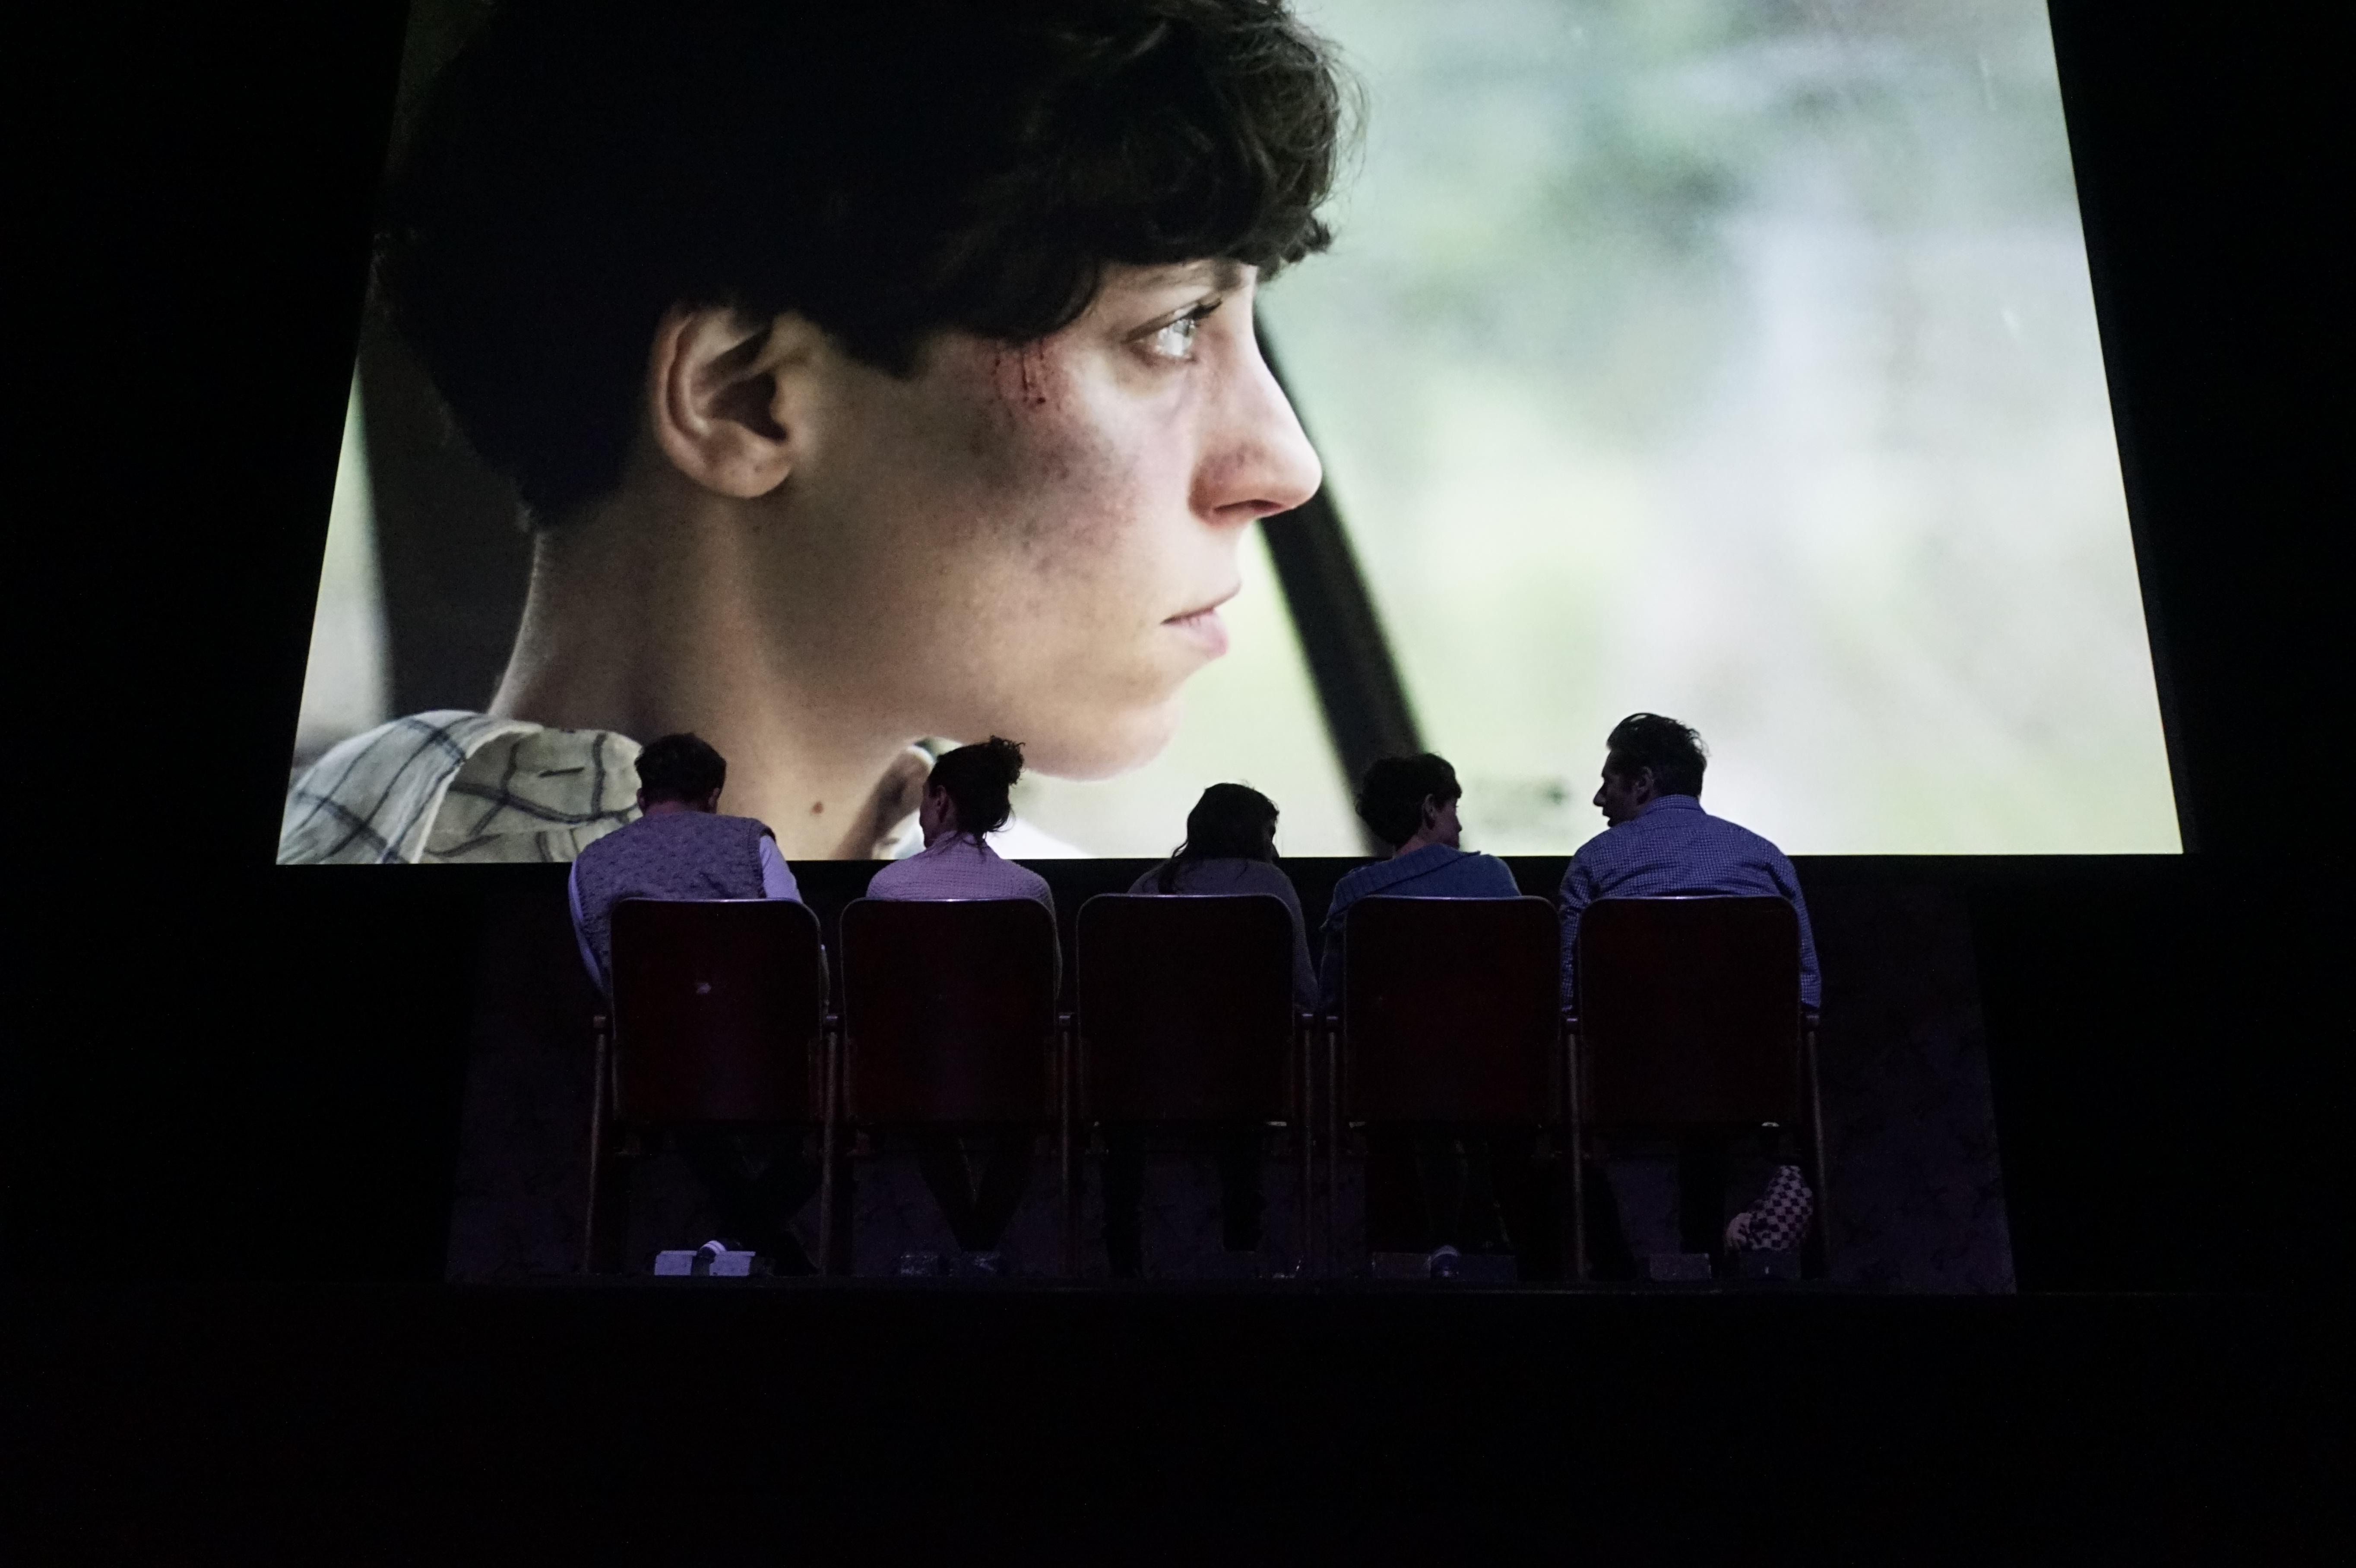 Five people in a darkened space sit on chairs with their backs to the audience; in front of them is a giant projected profile of a short-haired person looking to the right.